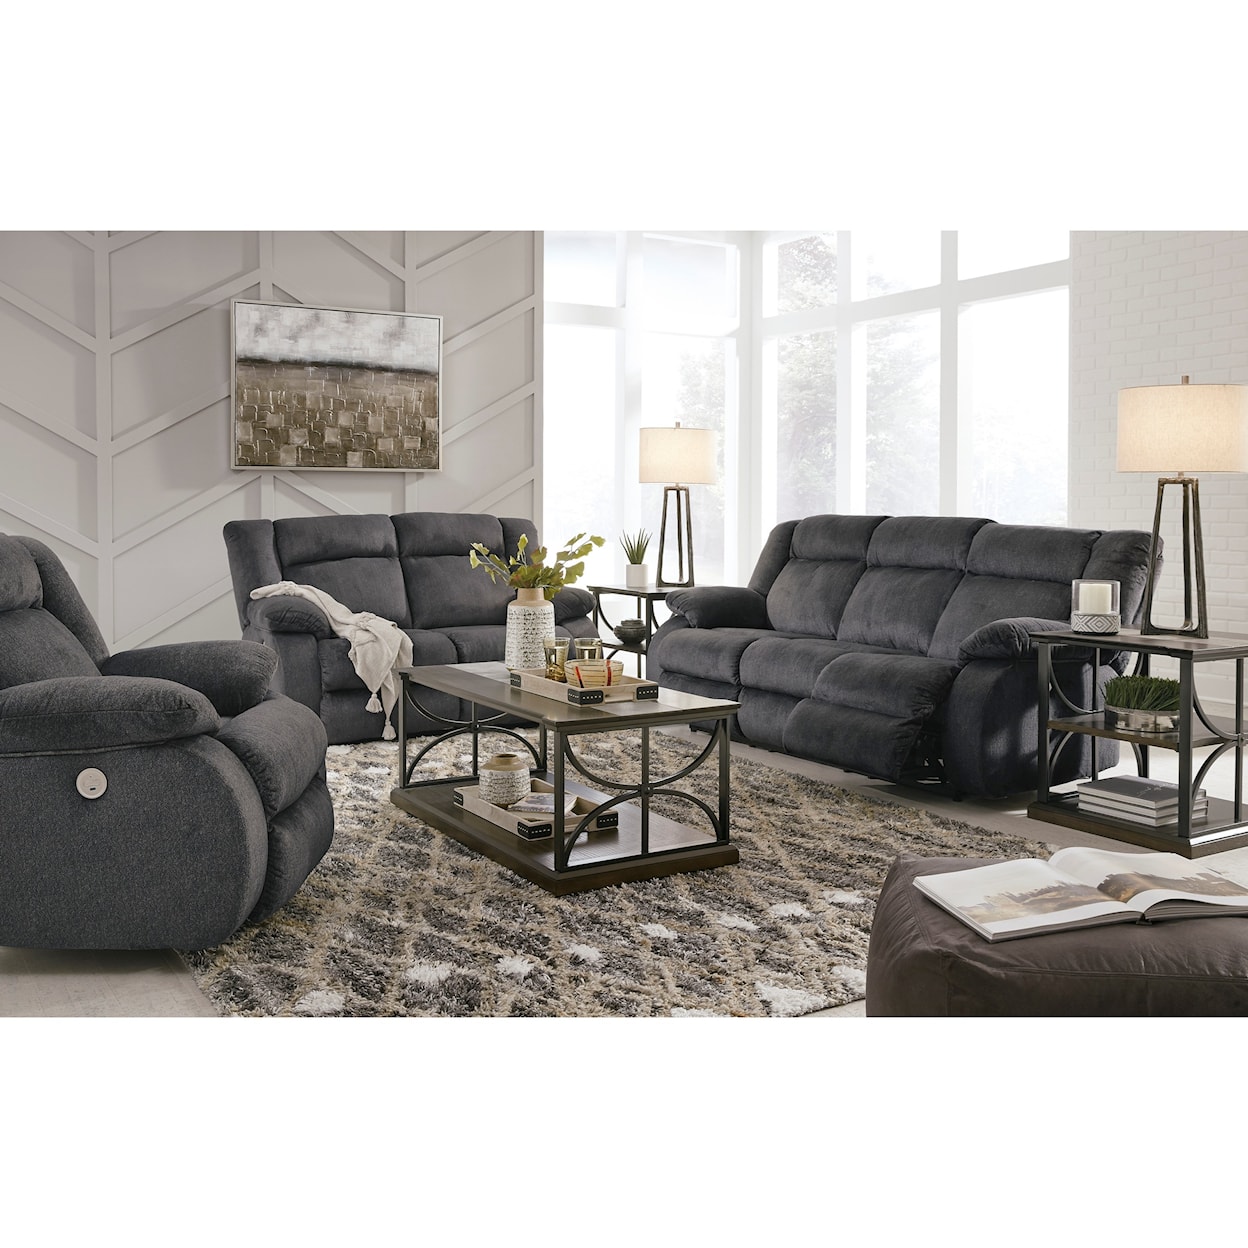 Signature Design by Ashley Burkner Power Reclining Living Room Group